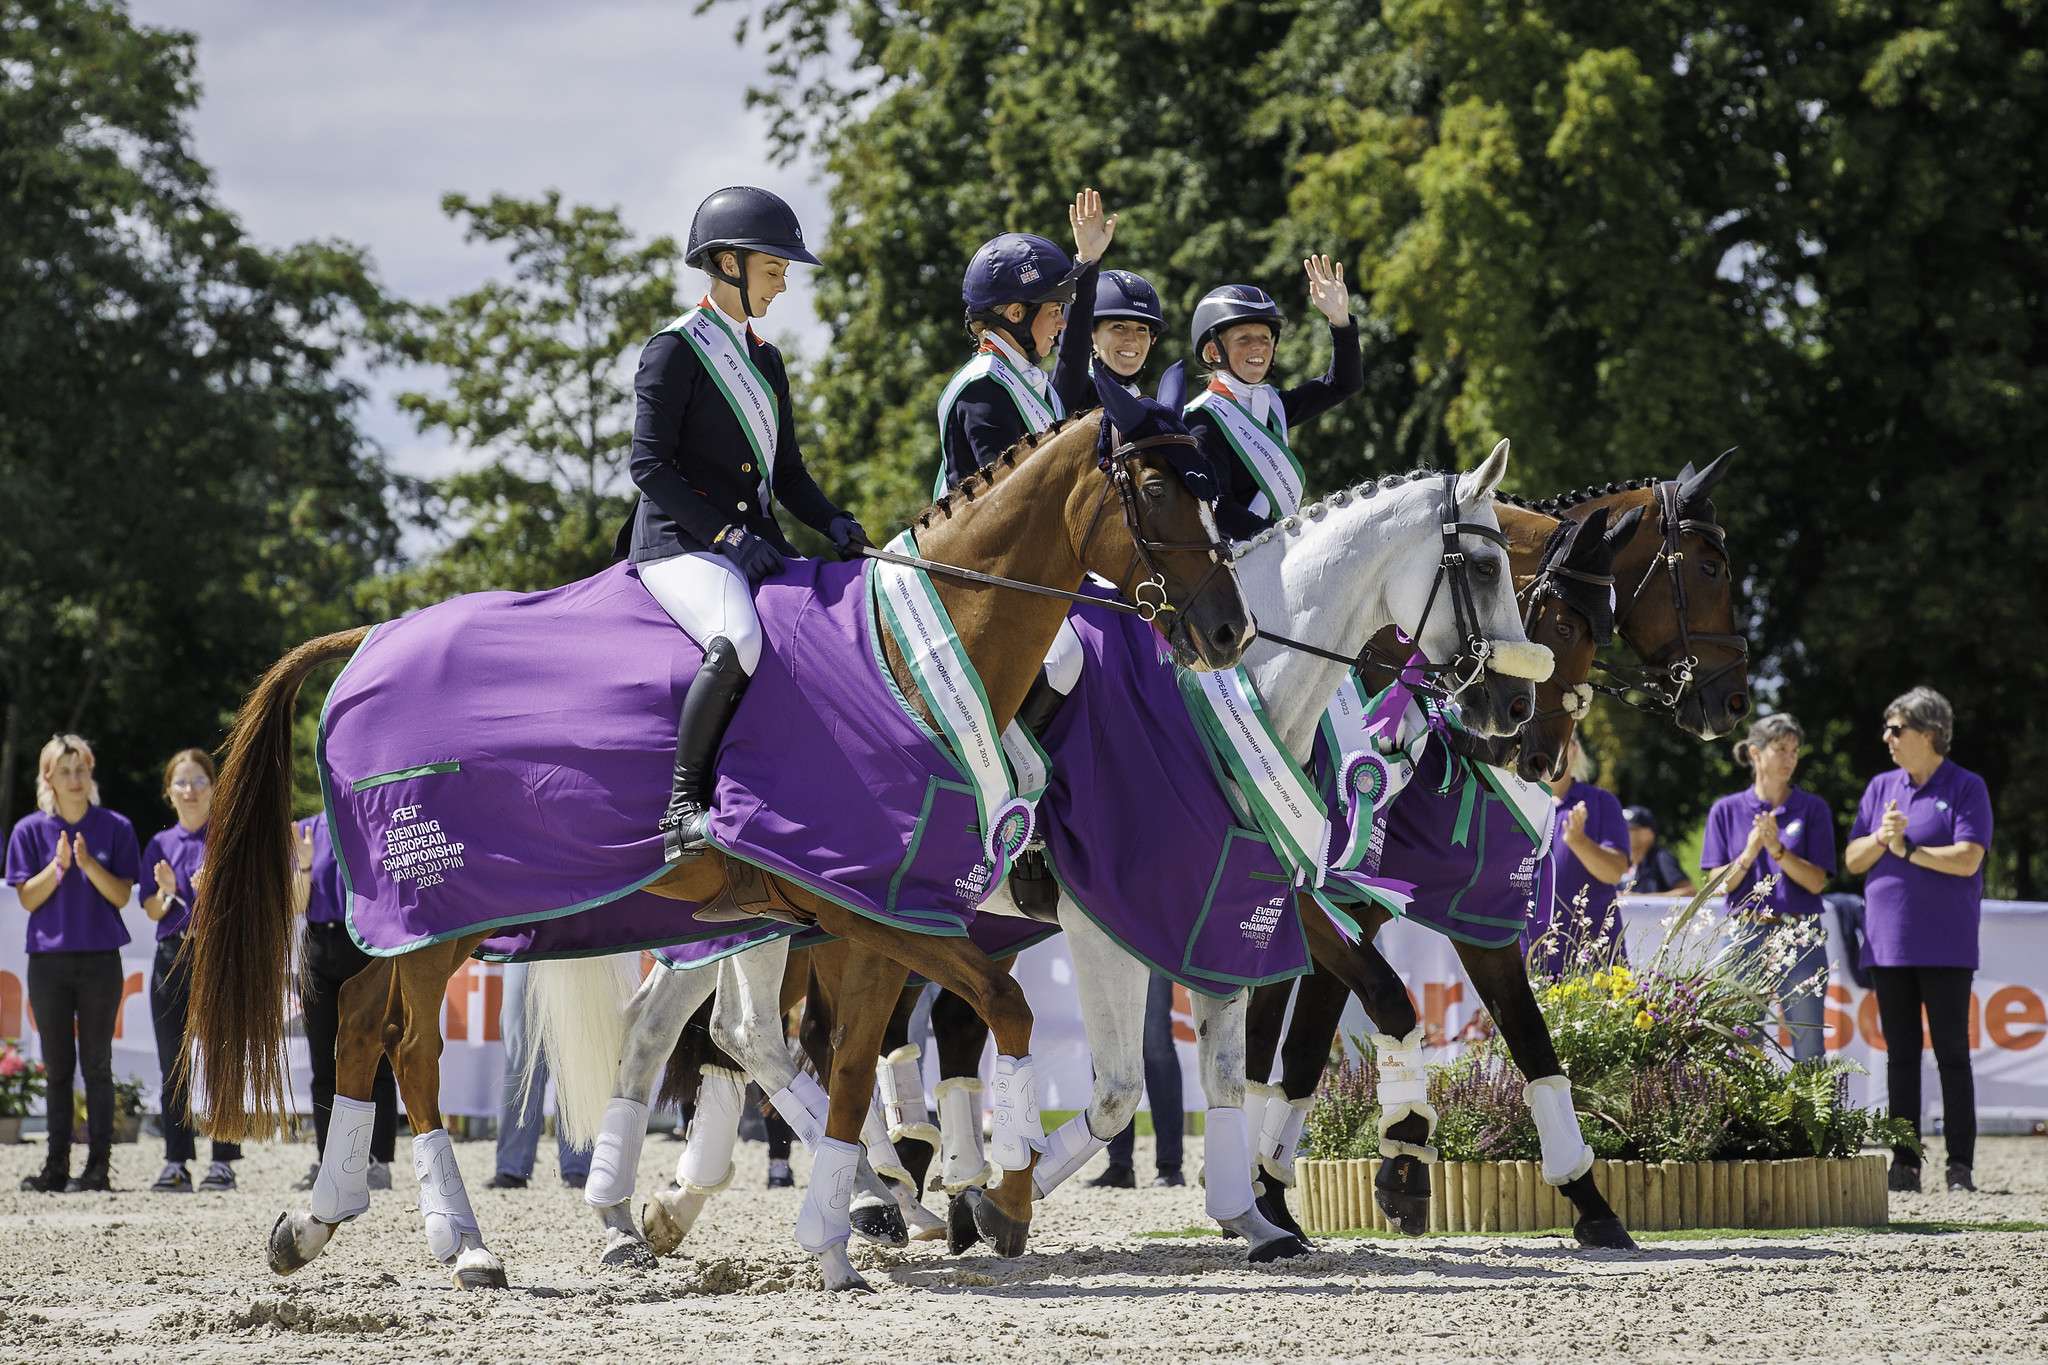 Team GOLD - Team Great Britain: Rosalind Canter; Laura Collett; Kitty King; Yasmin Ingham. The Medal Ceremony. 2023 FRA-FEI Eventing European Championships | Haras du Pin, France. Sunday 13 August 2023. Copyright Photo: Libby Law Photography